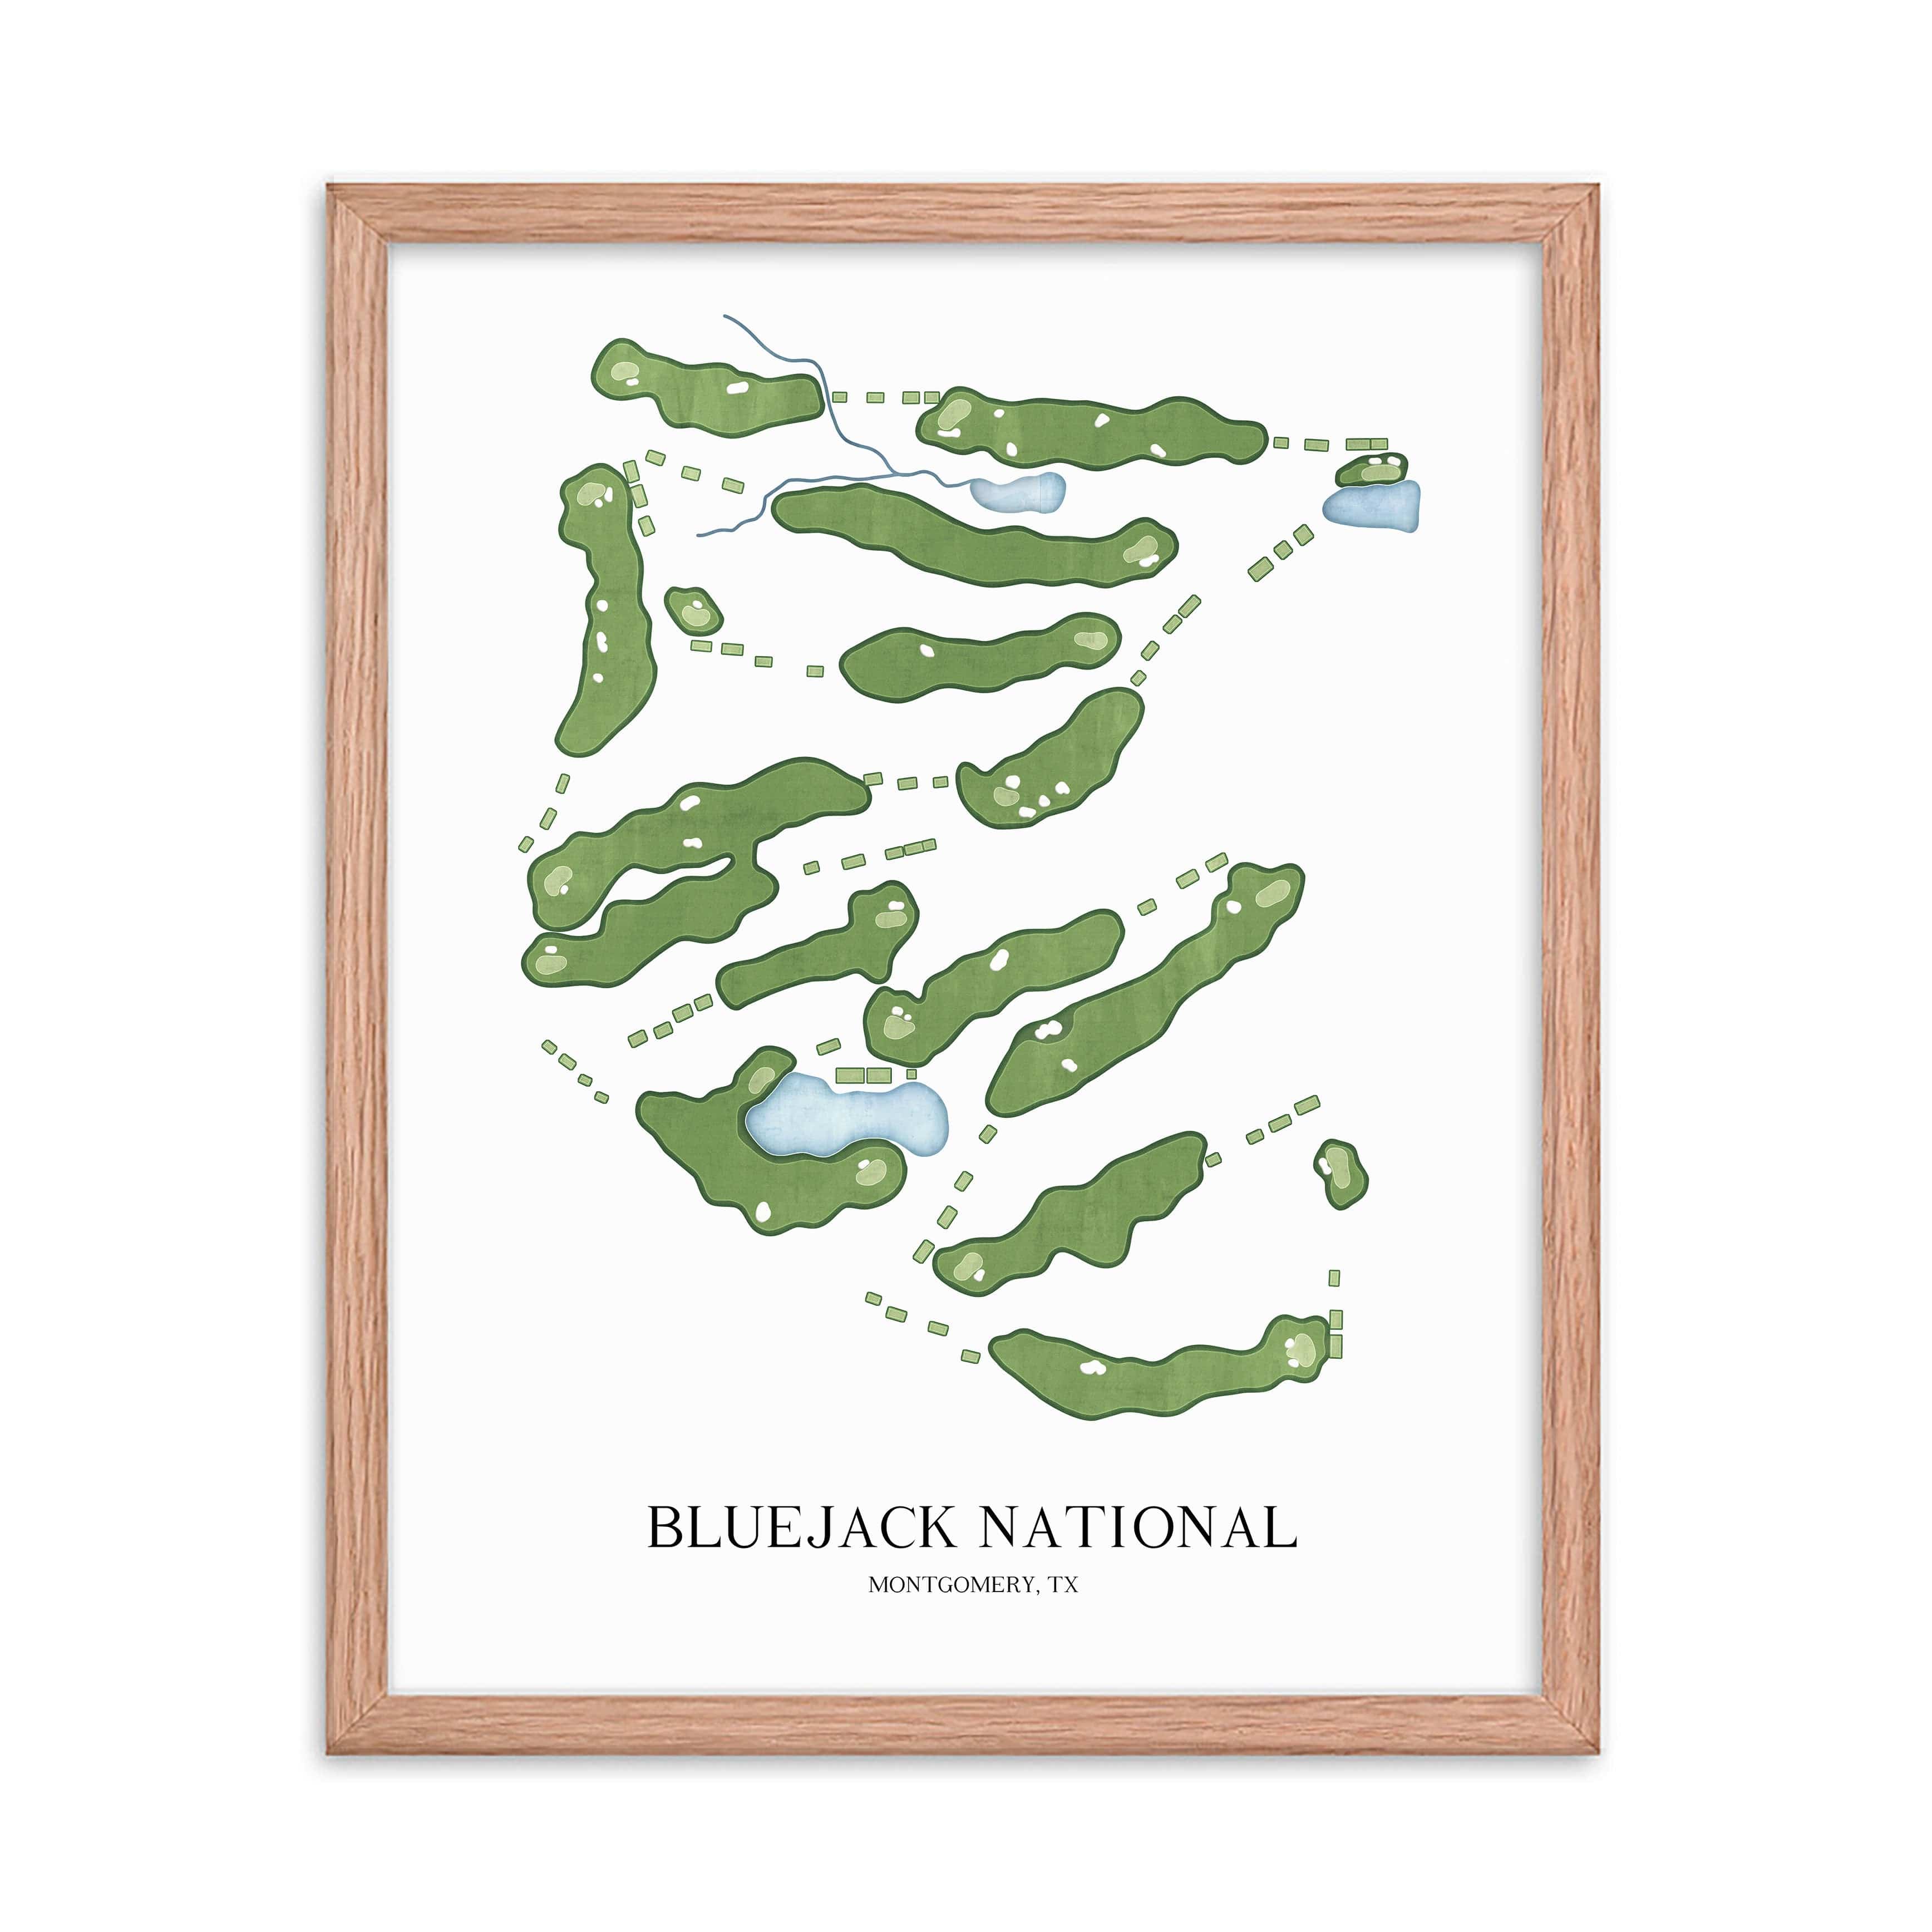 The 19th Hole Golf Shop - Golf Course Prints -  Bluejack National Golf Course Map